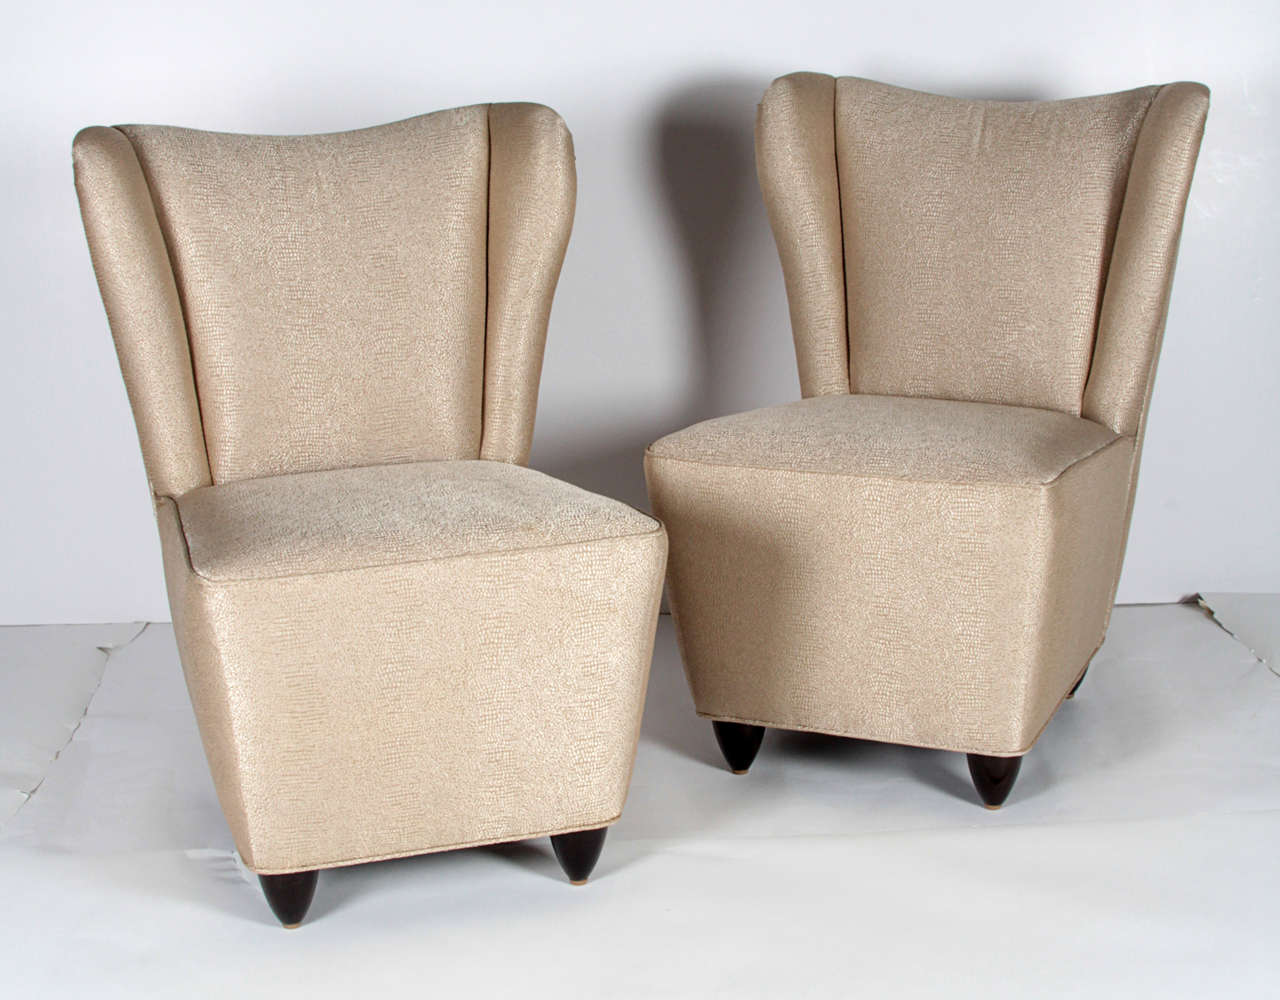 Pair of Italian wingback slipper chairs attributed to Gio Ponti.